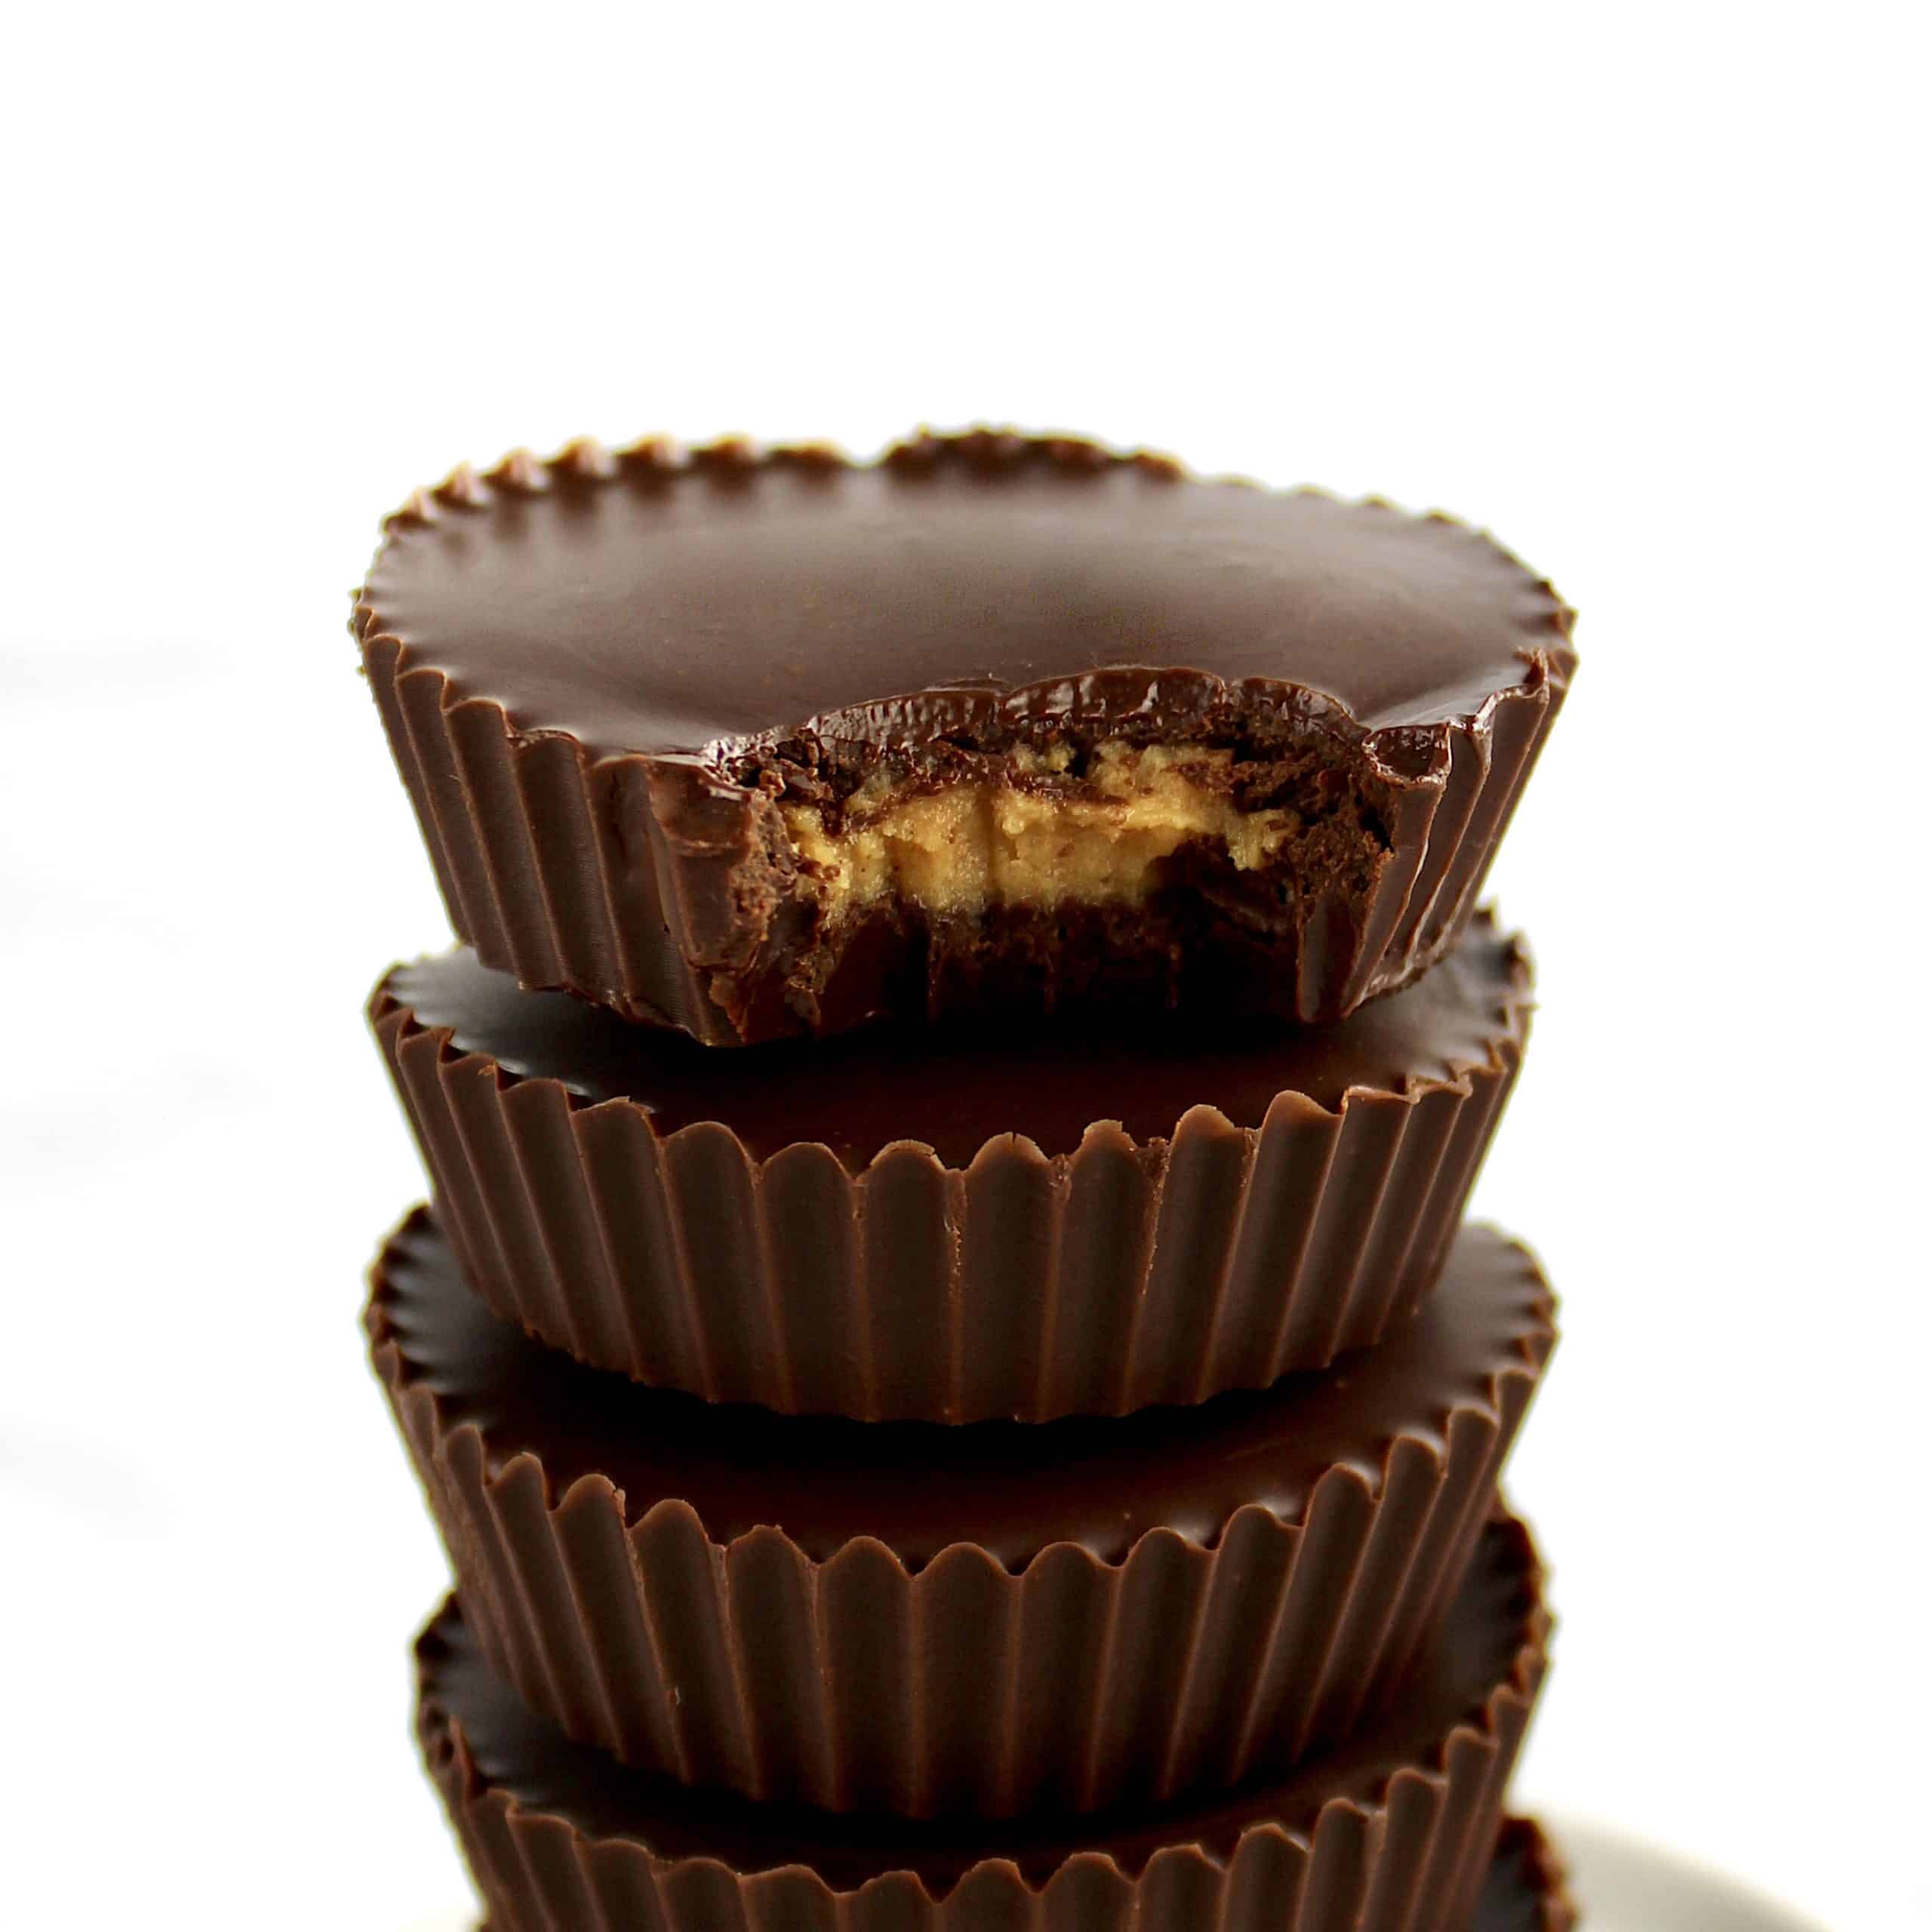 Keto Peanut Butter Cups stacked with bite missing from the top one